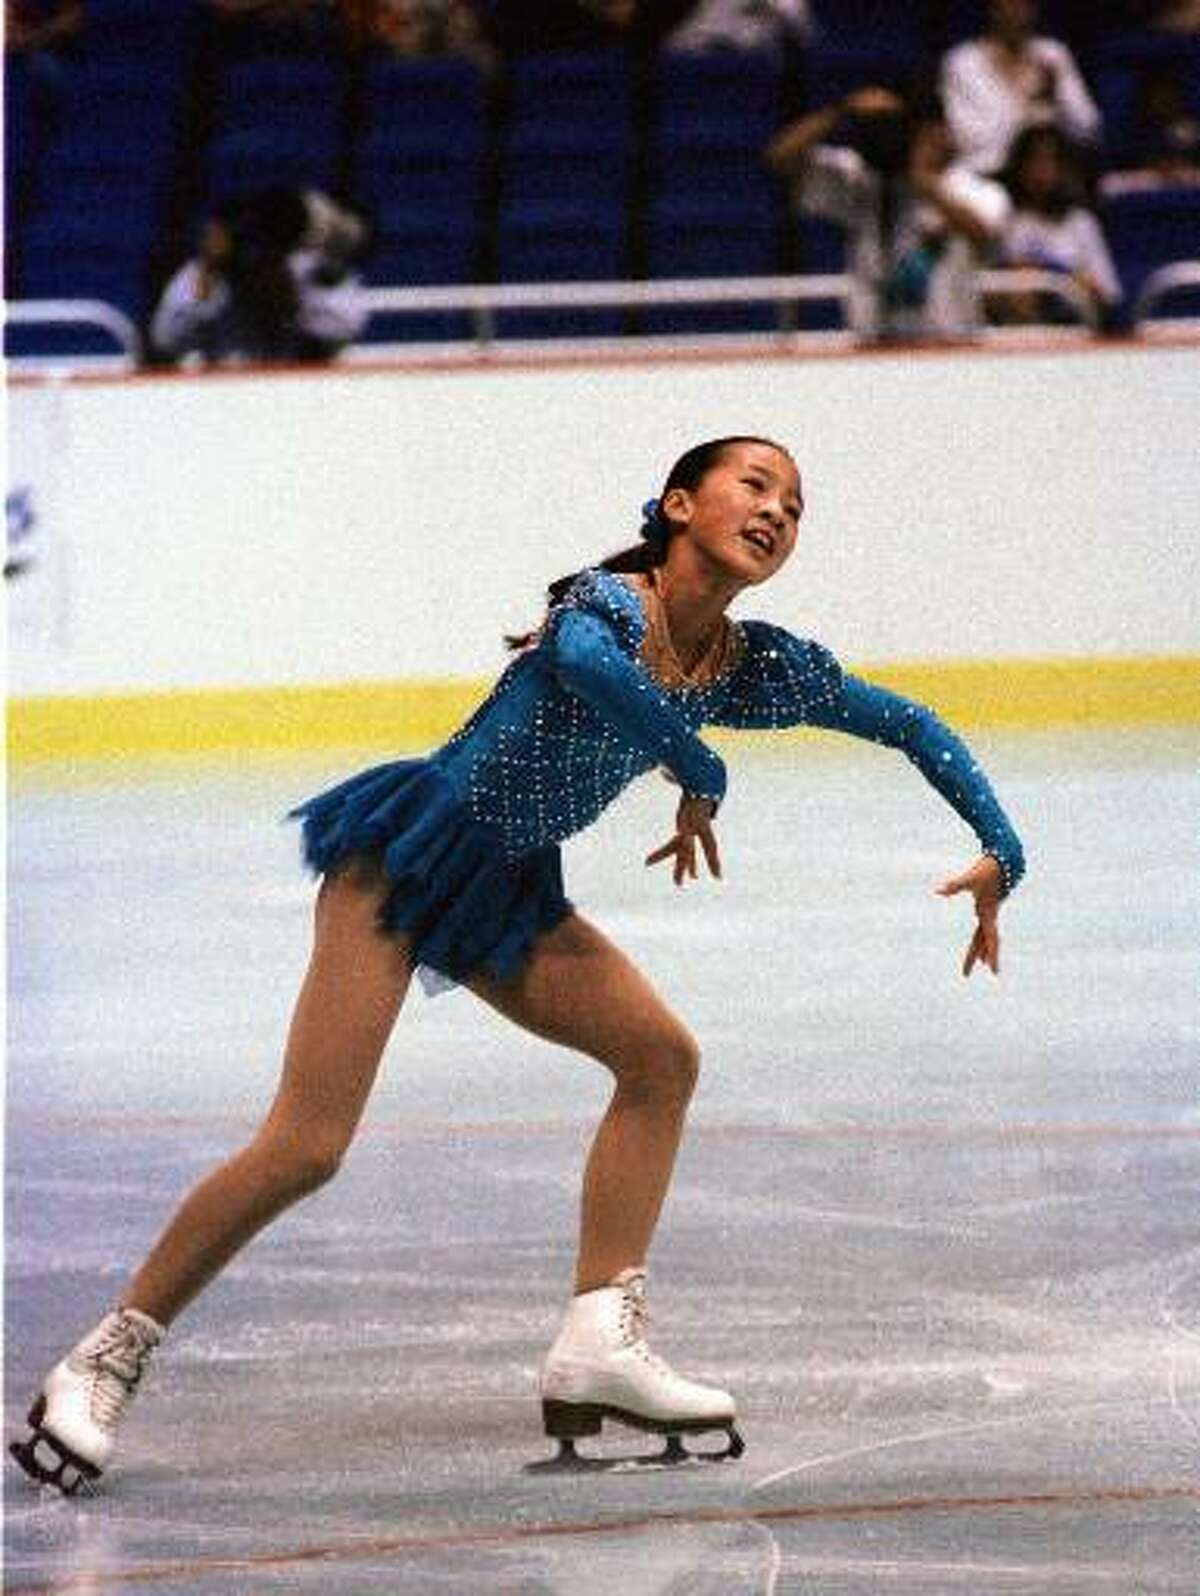 Olympic skater Michelle Kwan skates in the Alamodome during the Olympic Festival, July 24, 1993. Her performance captivated 25,691 patrons at the Alamodome, and they gave her a standing ovation as she left the ice. Several fans threw roses and other flowers onto the ice as she glided for a victory lap after claiming the gold medal.